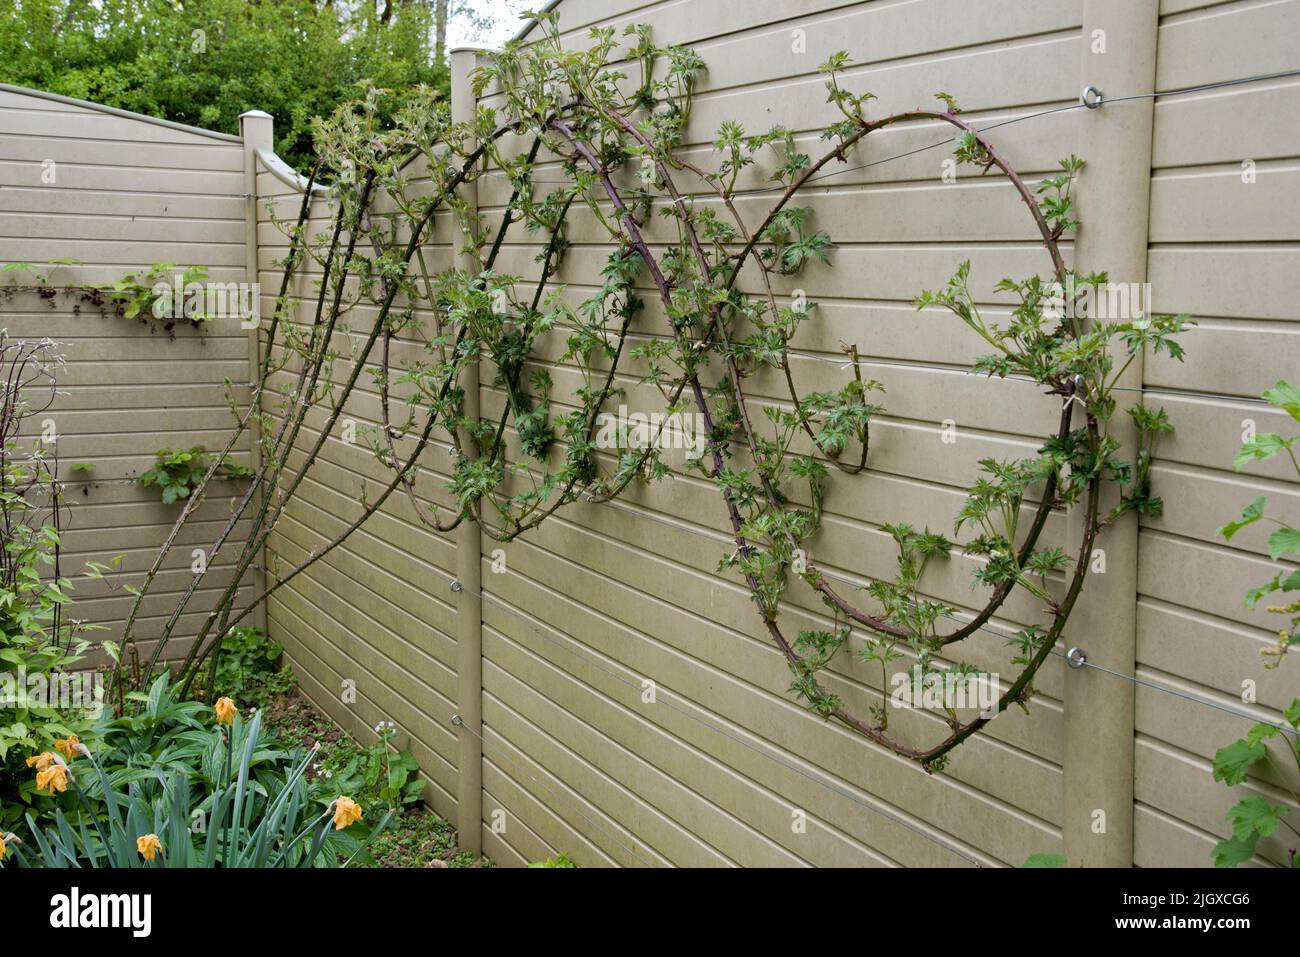 Soft fruit bushes growing against a garden fence Stock Photo